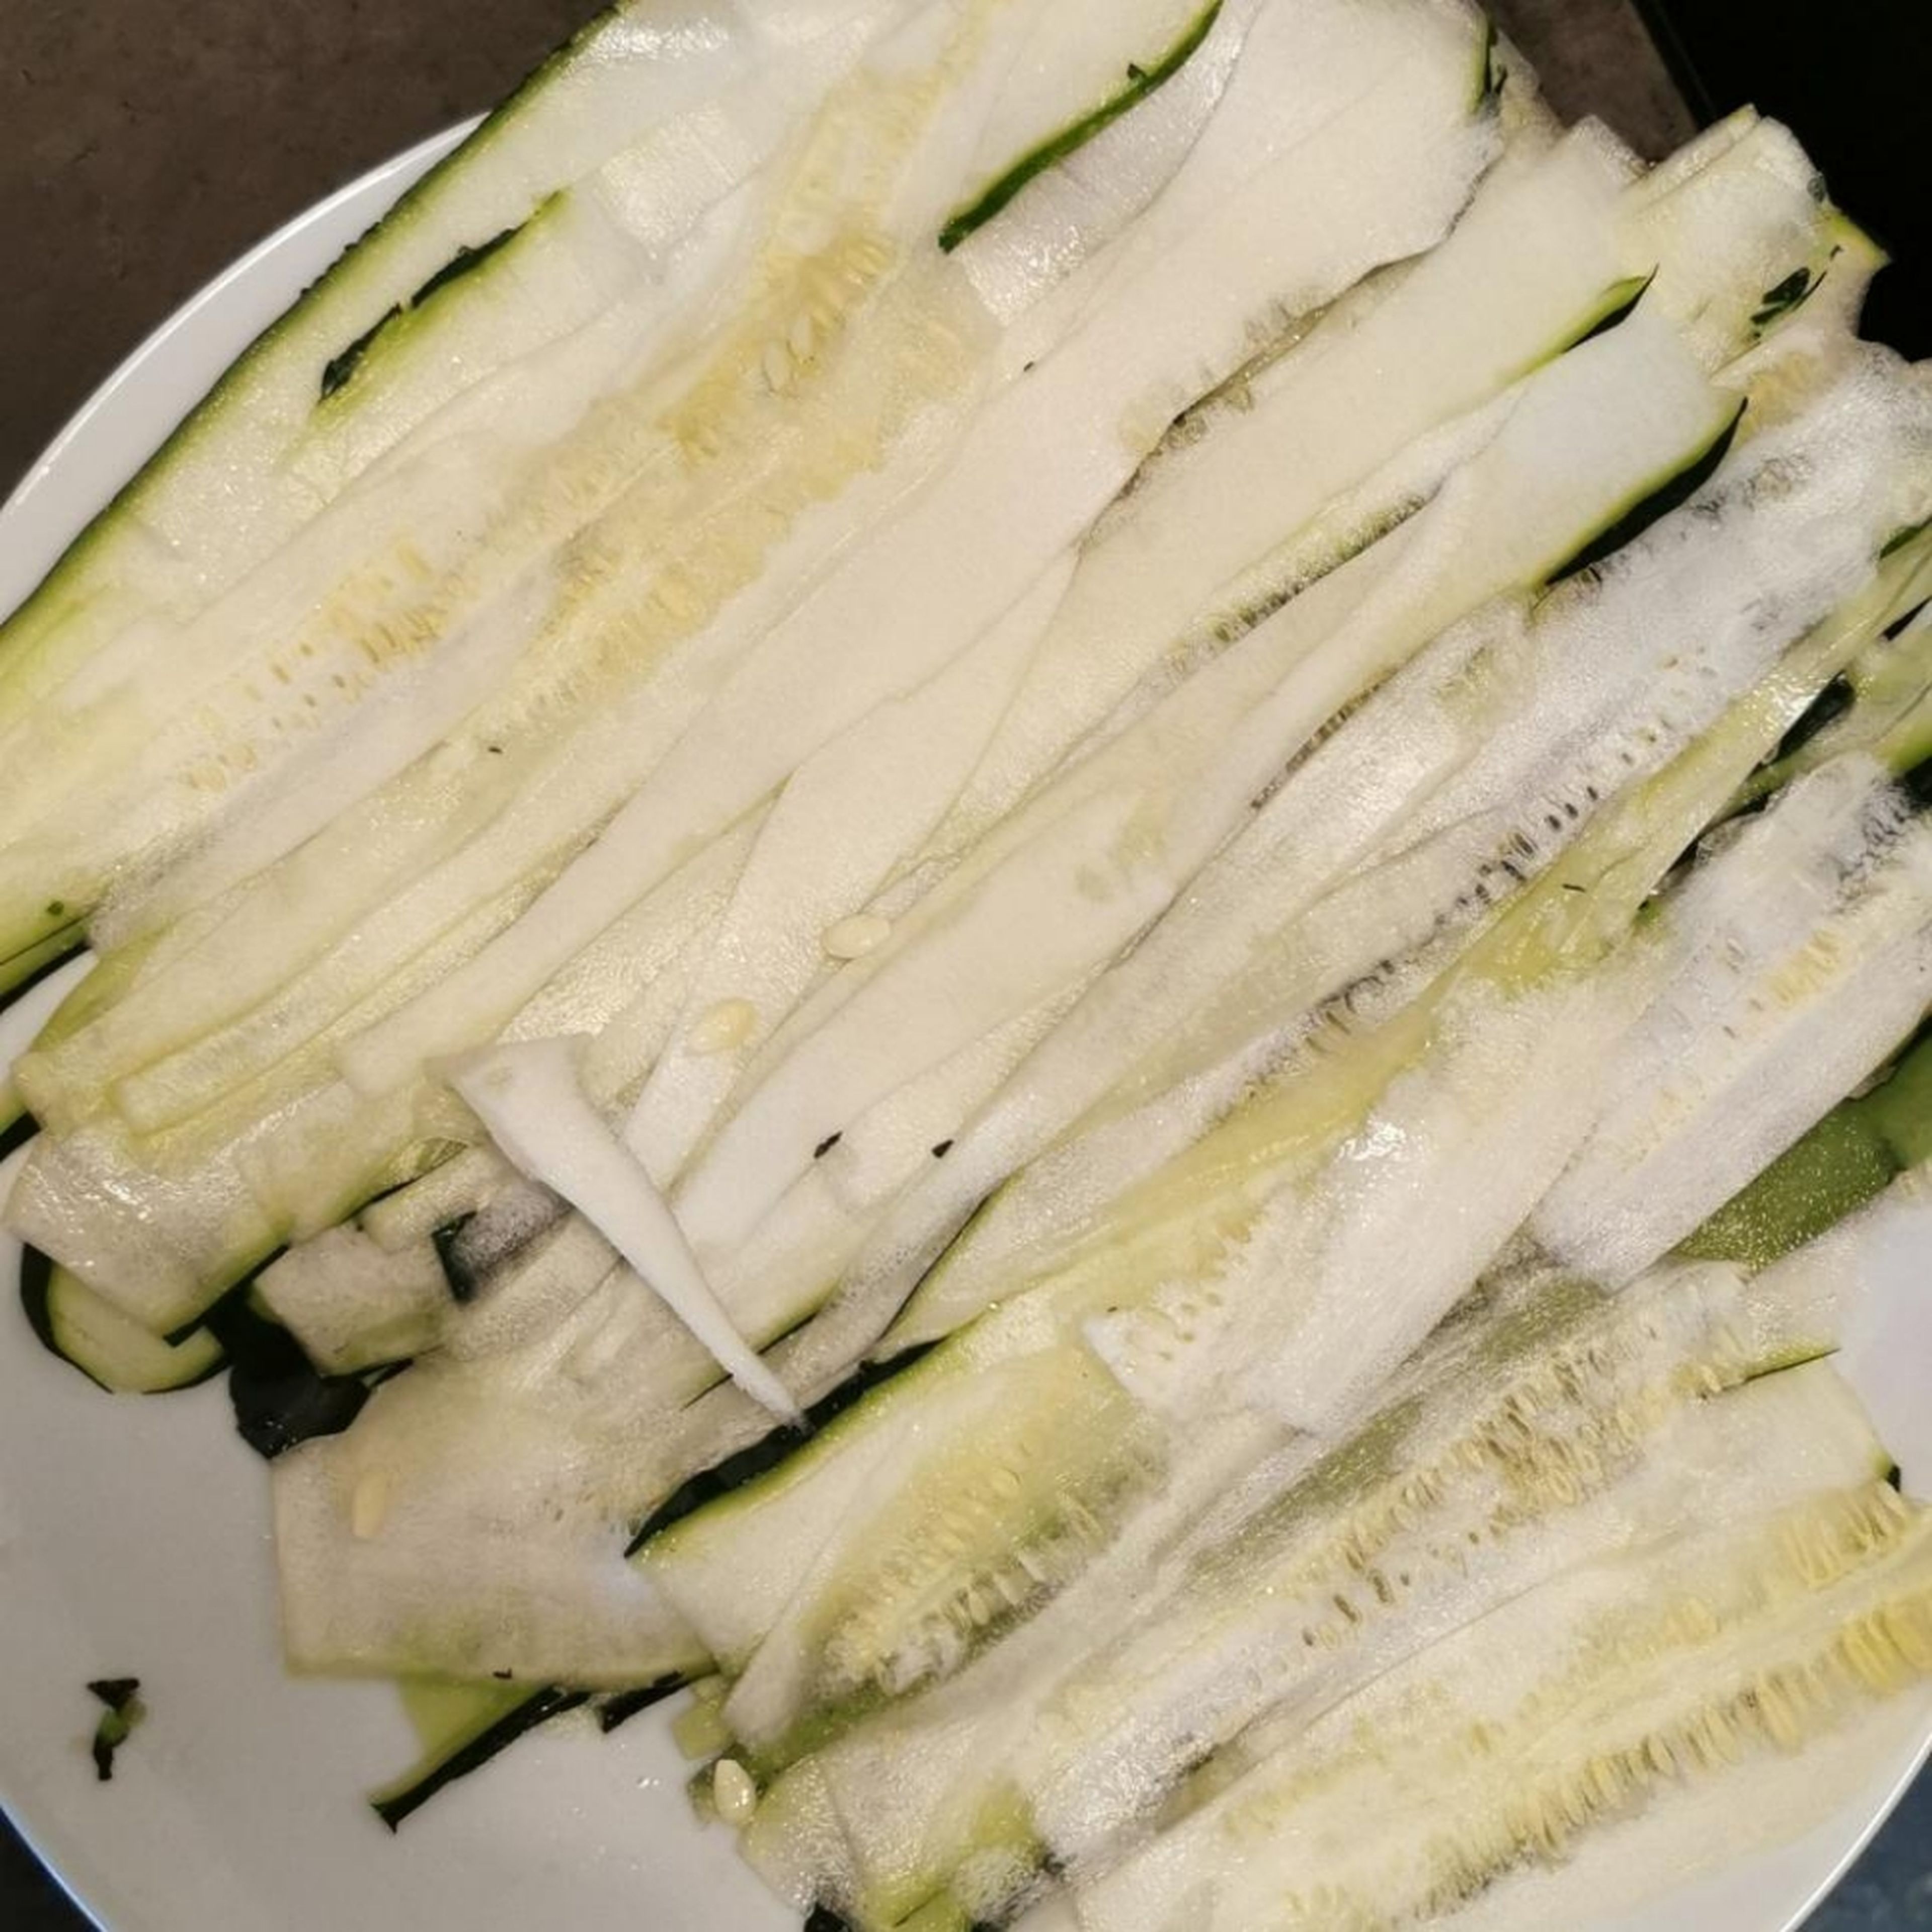 Use a peeler to cut zucchini into thin slices. Sprinkle with salt to extract excess liquid.